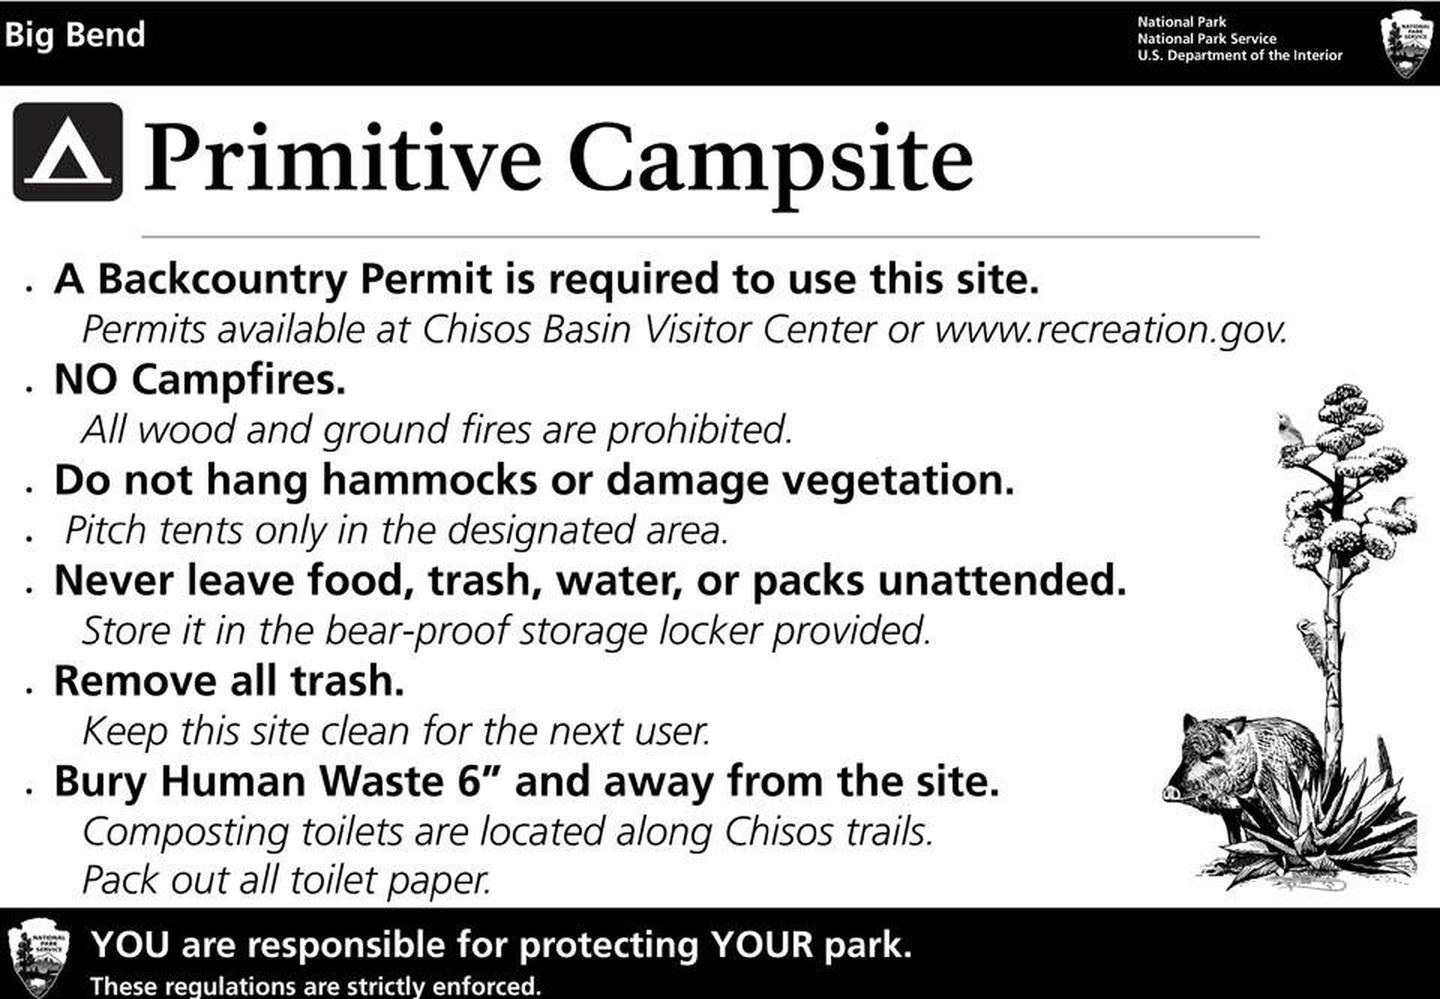 Chisos Primitive Campsite RegulationsProtect Big Bend. YOU are responsible for protecting YOUR park.